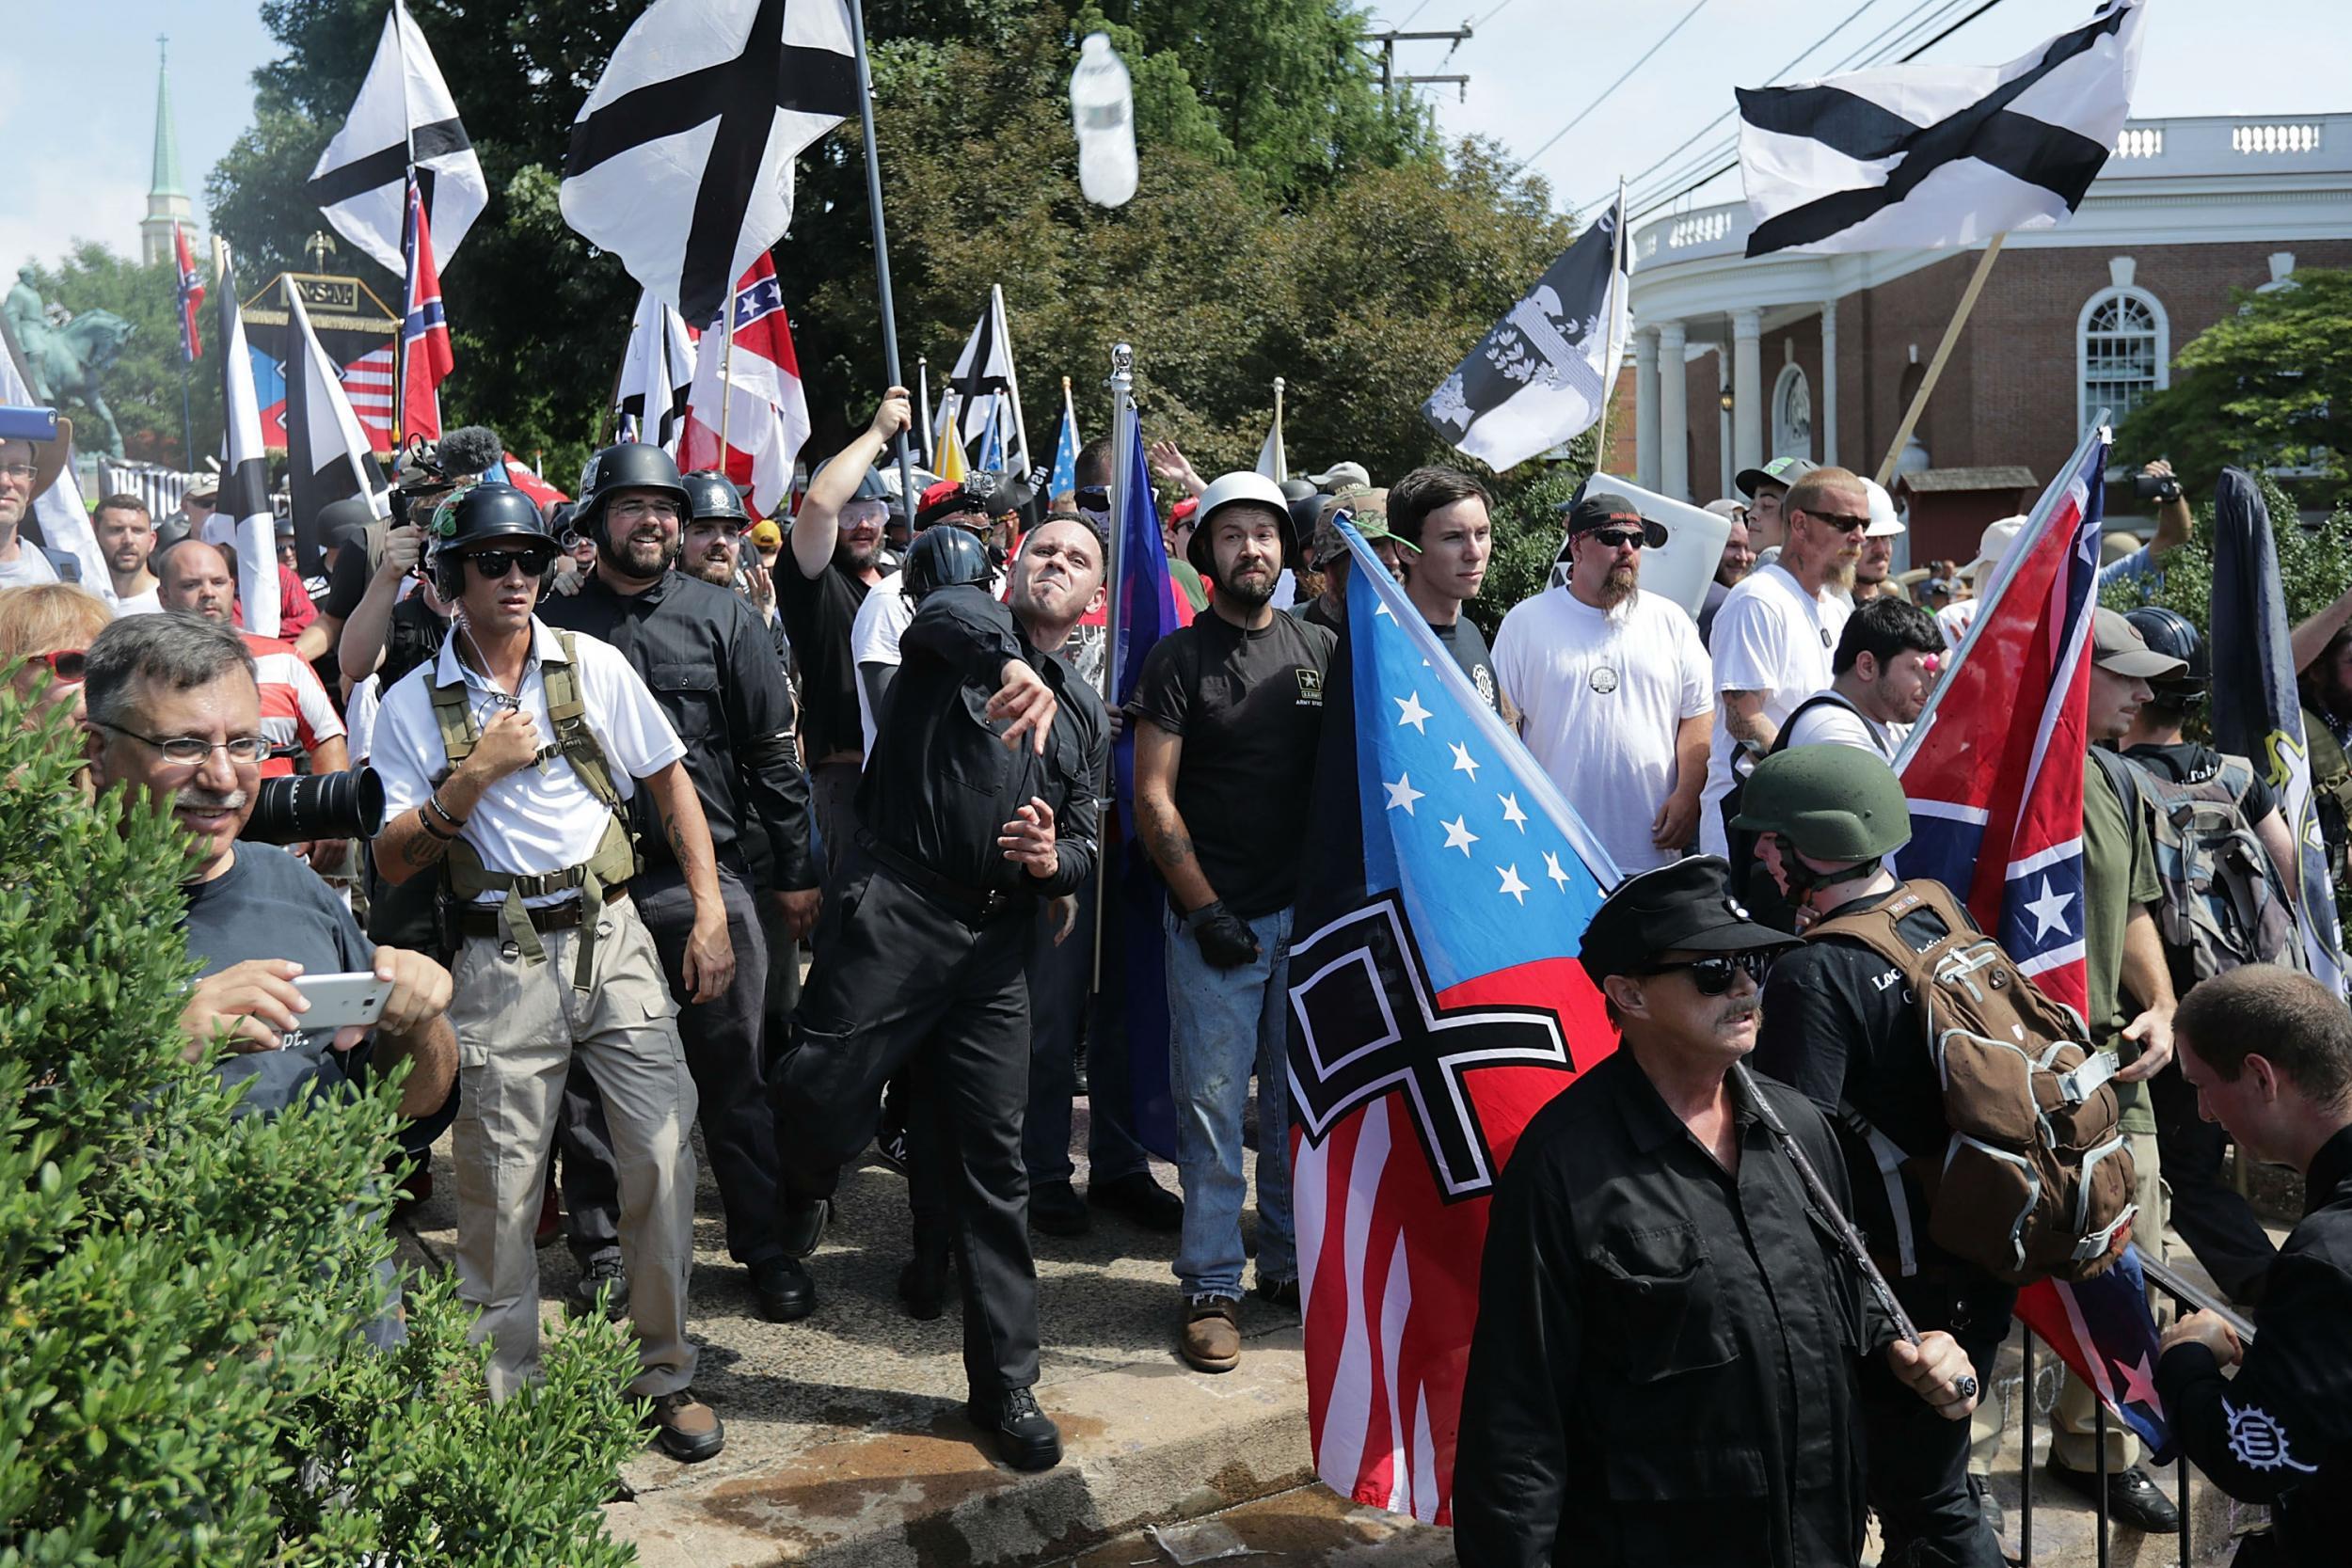 One person was killed and many injured after the neo-Nazi led clashes in Virginia